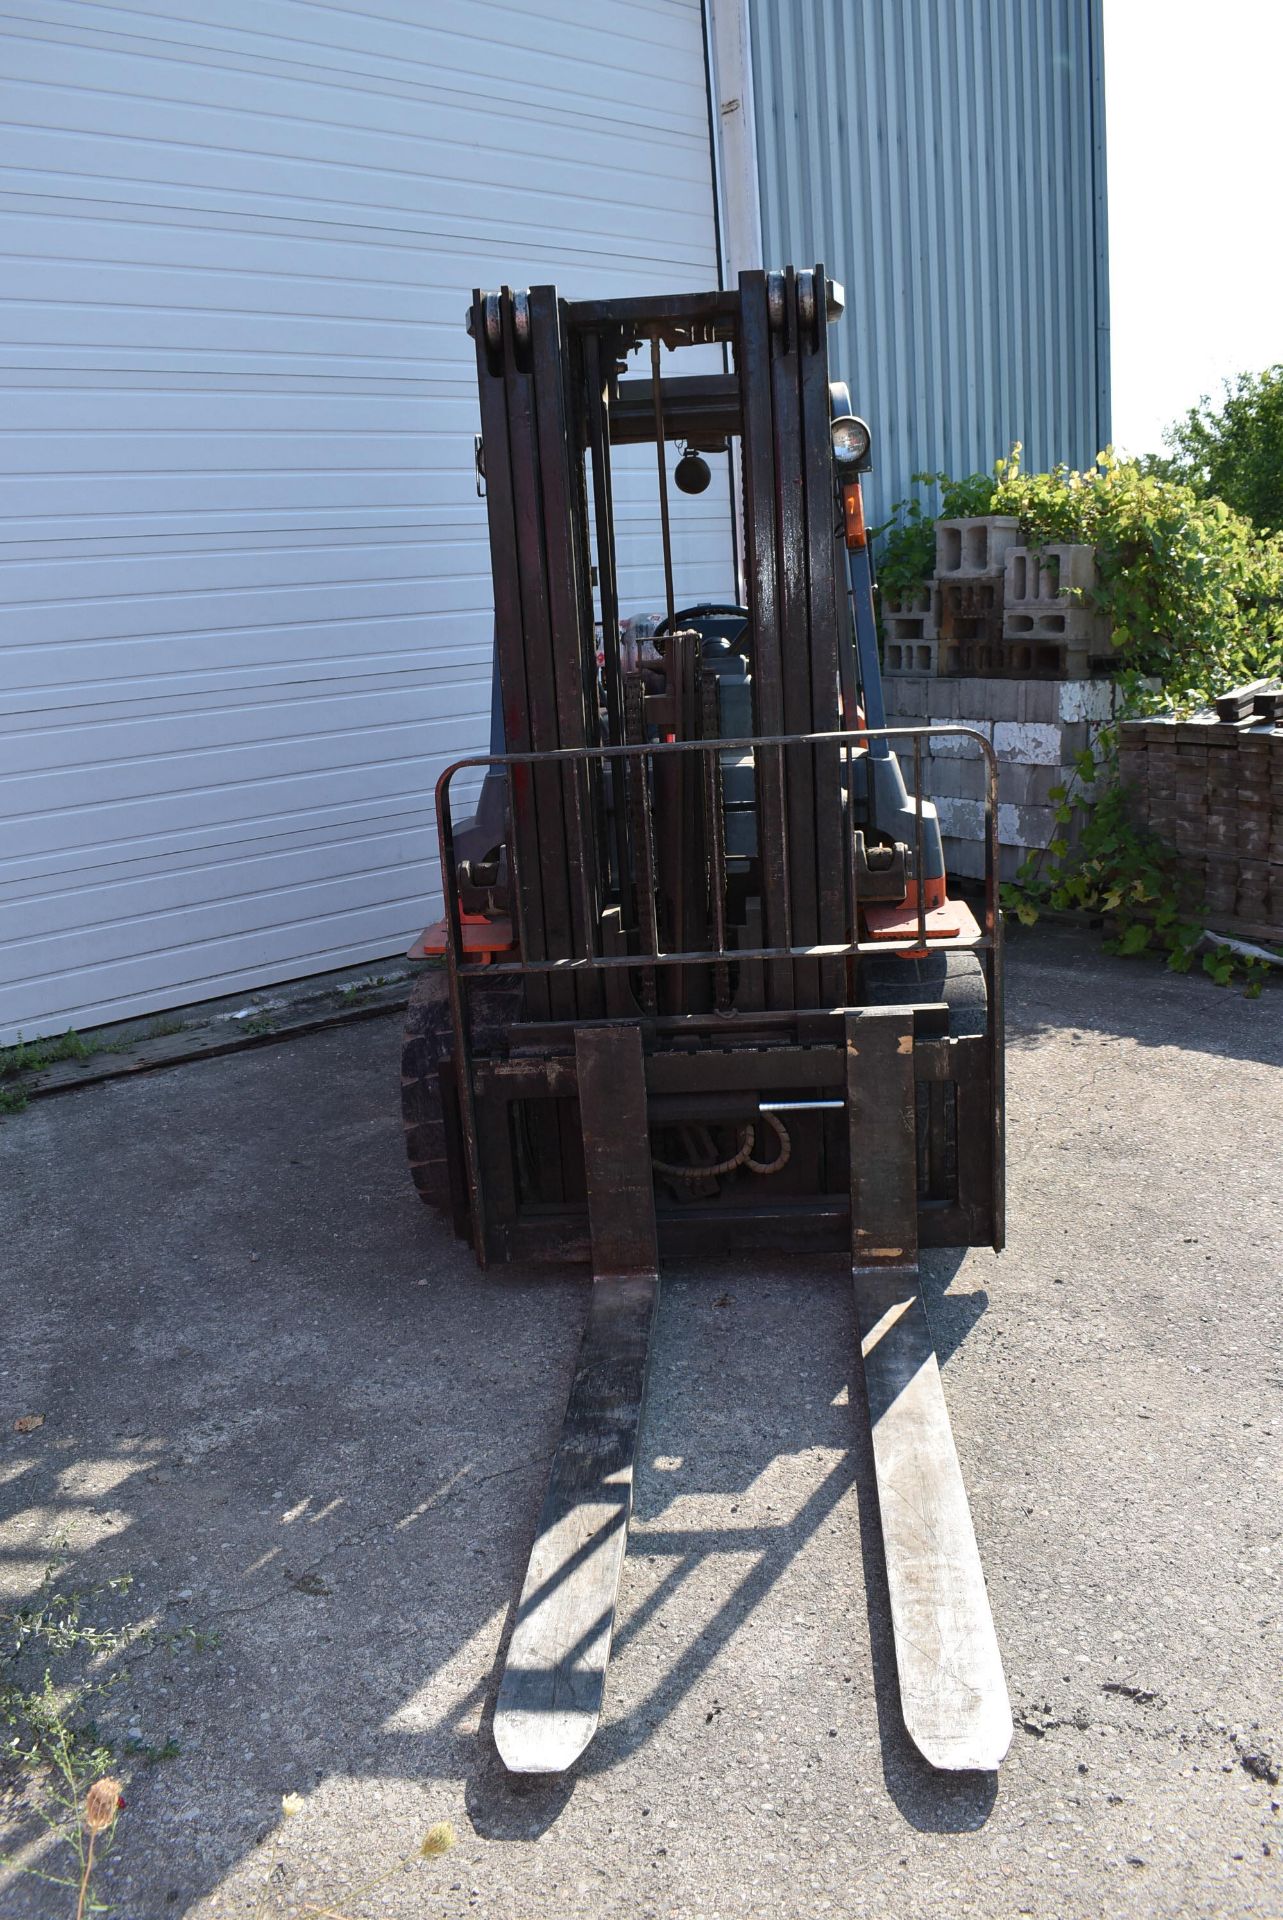 TOYOTA 35 7FGU35 7,000 LB CAPACITY LPG FORKLIFT WITH 187" MAXIMUM LIFT HEIGHT, 3-STAGE MAST, SIDE - Image 2 of 9